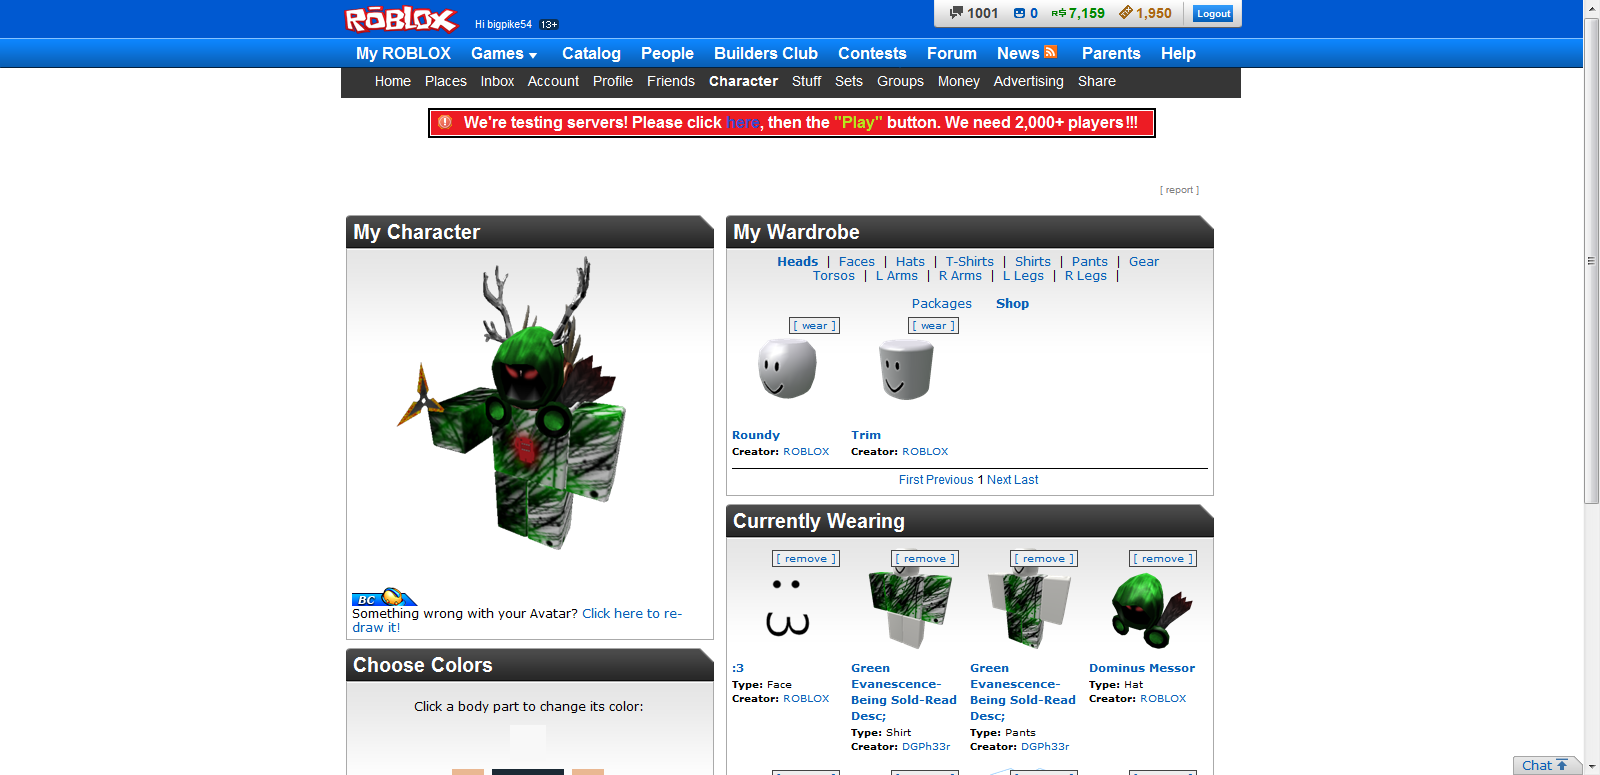 Whats Hot In Lmad New Site Design For Better Or For Worse - roblox 2012 site